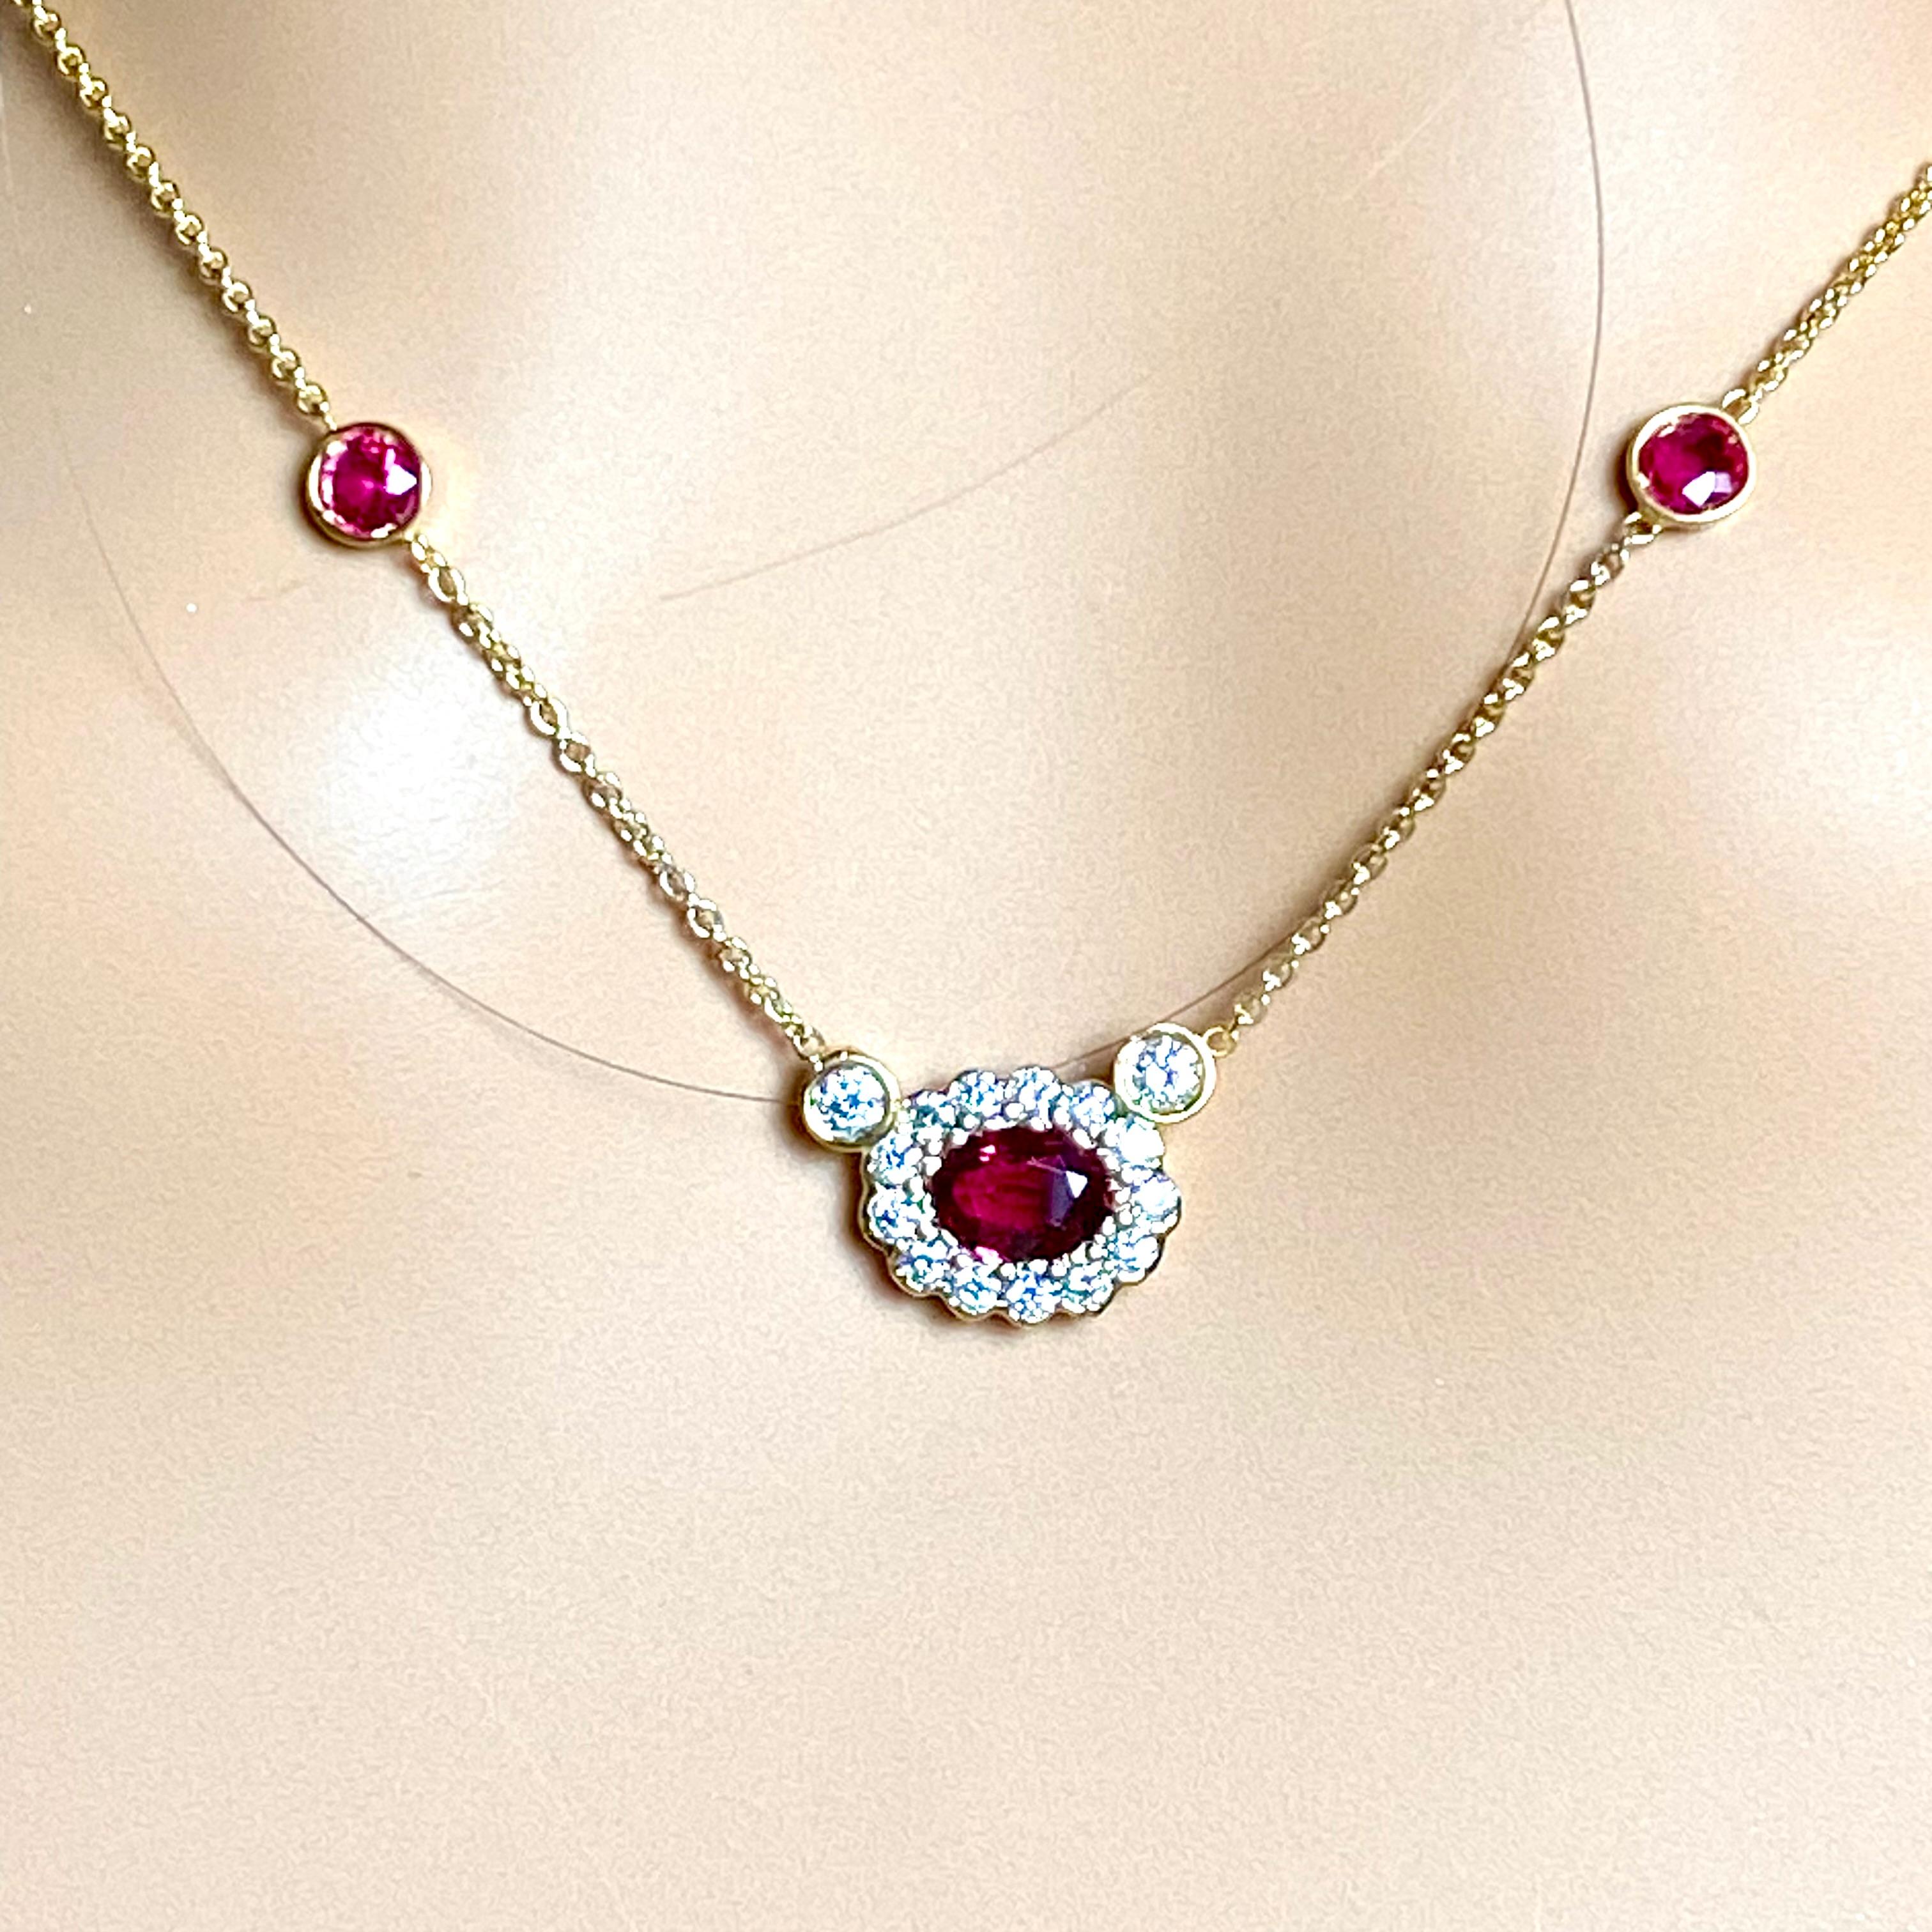 Welcome to our exquisite collection of fine jewelry, where luxury meets elegance. Introducing the Halo Diamond Burma Ruby Pendant, a true embodiment of beauty and sophistication. This stunning pendant features a magnificent 2.60-carat Burma ruby,